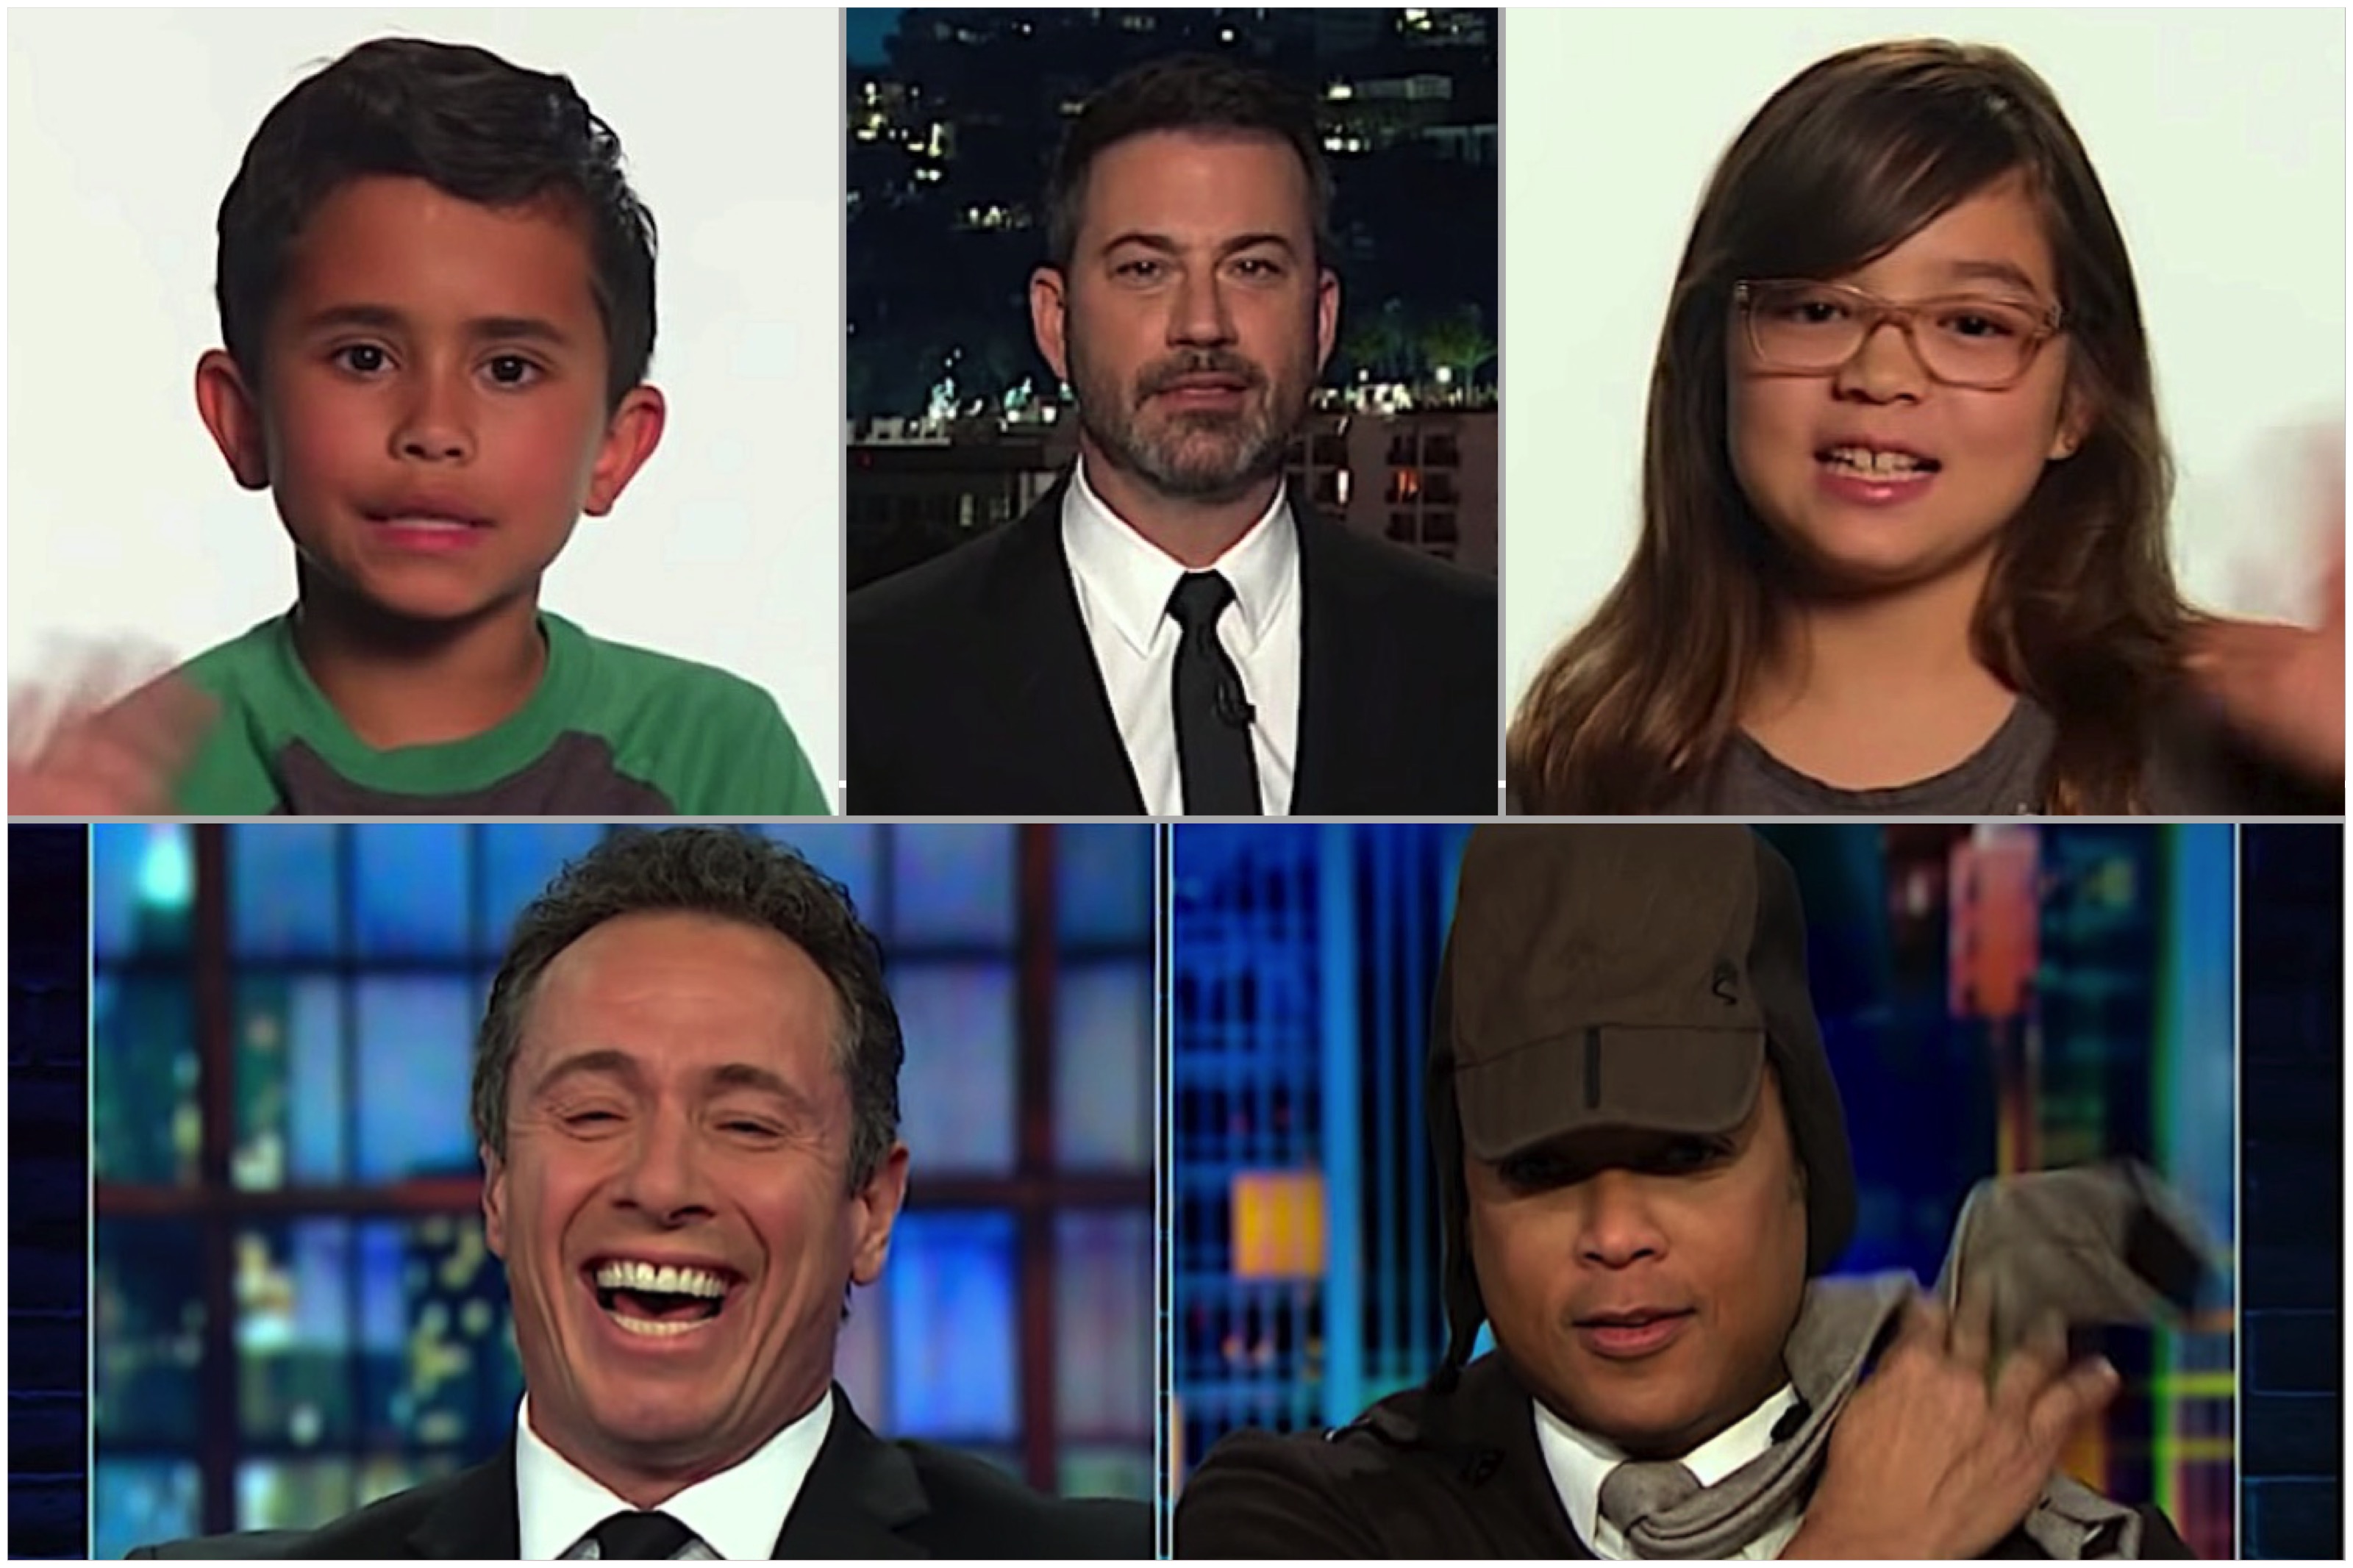 Jimmy Kimmel, 2 kids, and CNN&#039;s Chris Cuomo and Don Lemon on Trump versus climate change